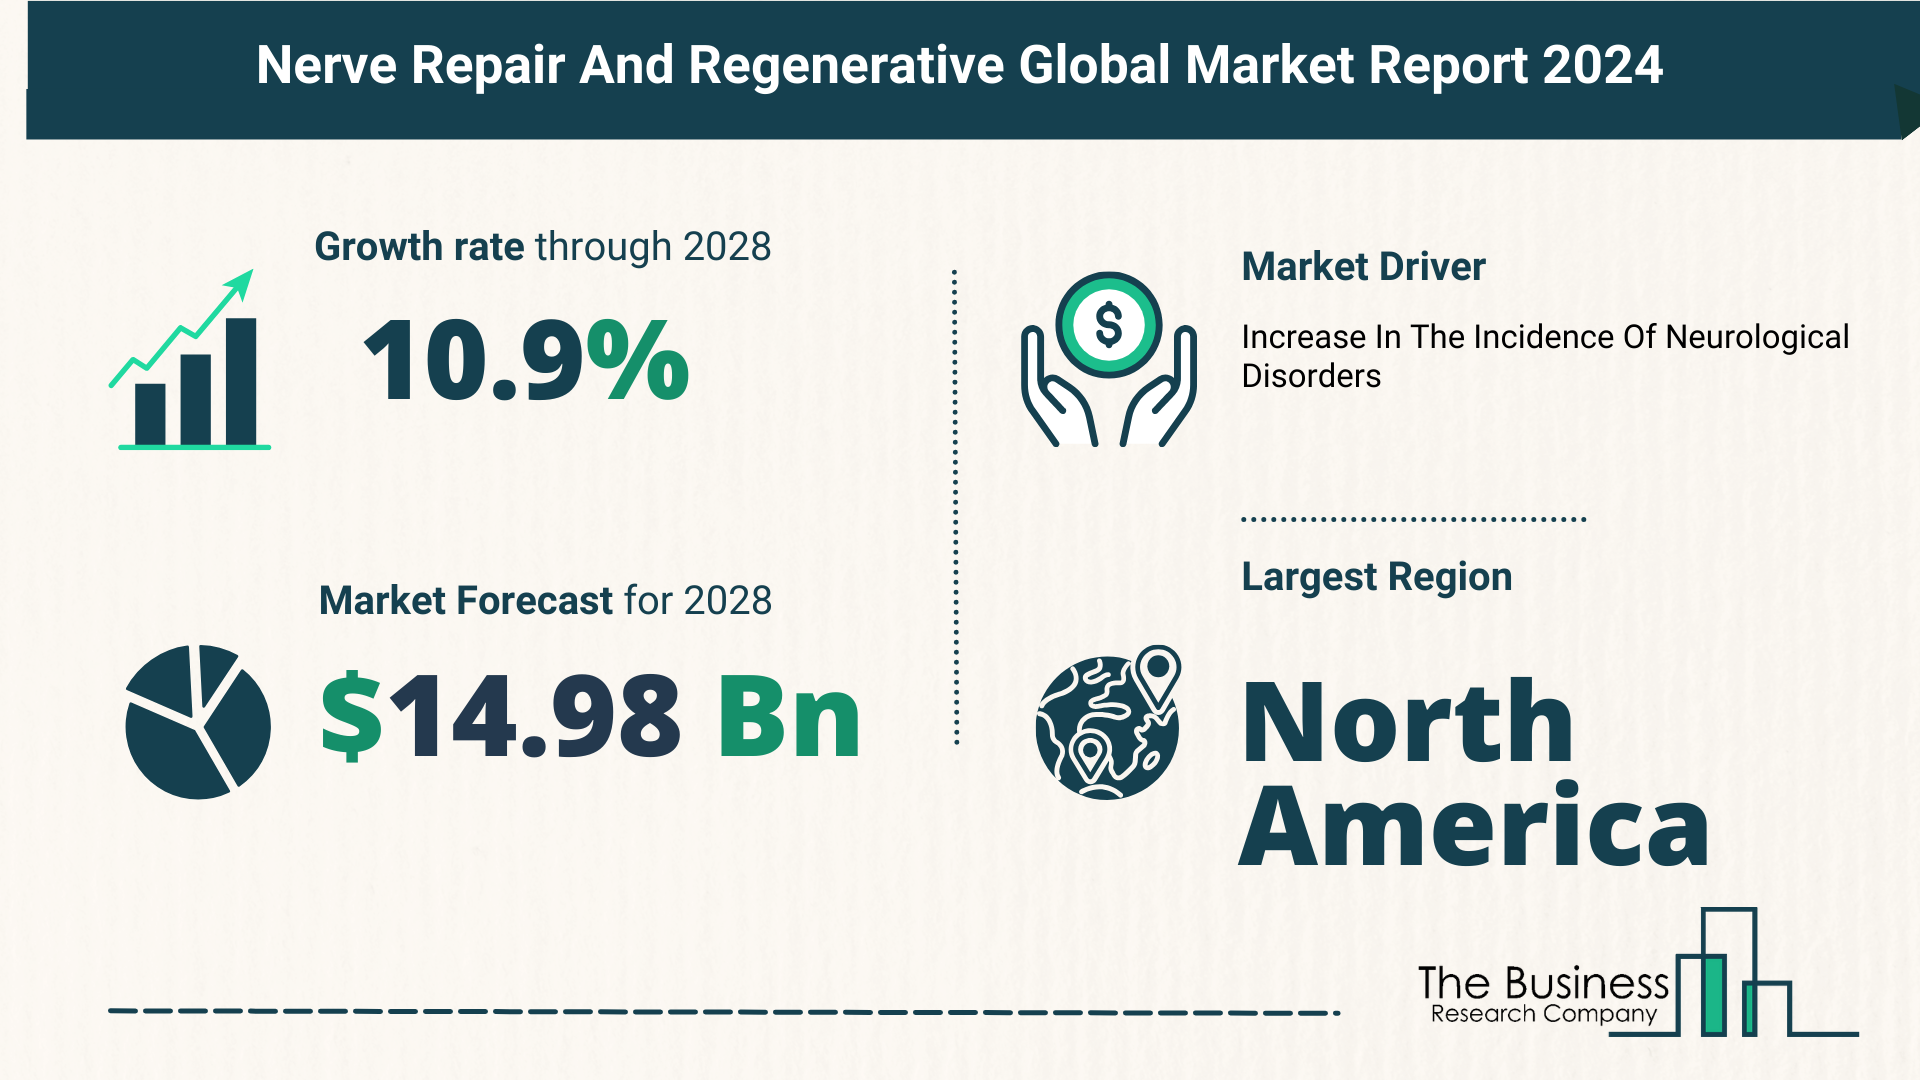 Comprehensive Analysis On Size, Share, And Drivers Of The Nerve Repair And Regenerative Market